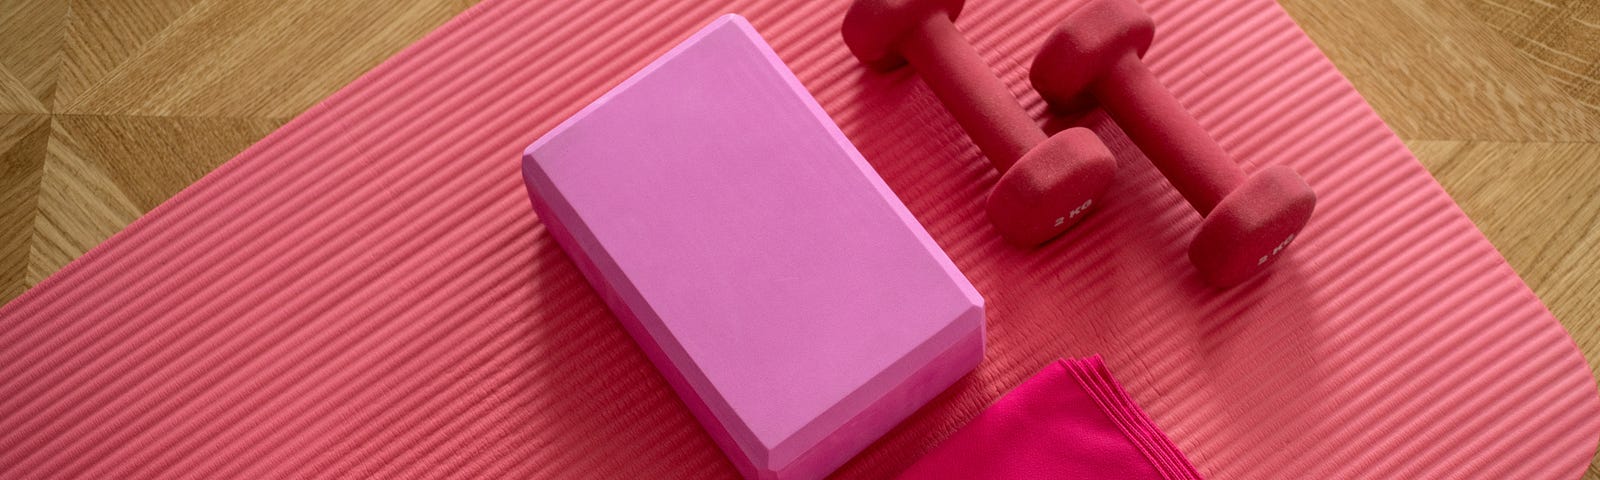 Pink yoga mat on parquet floor with pink block and pick towel